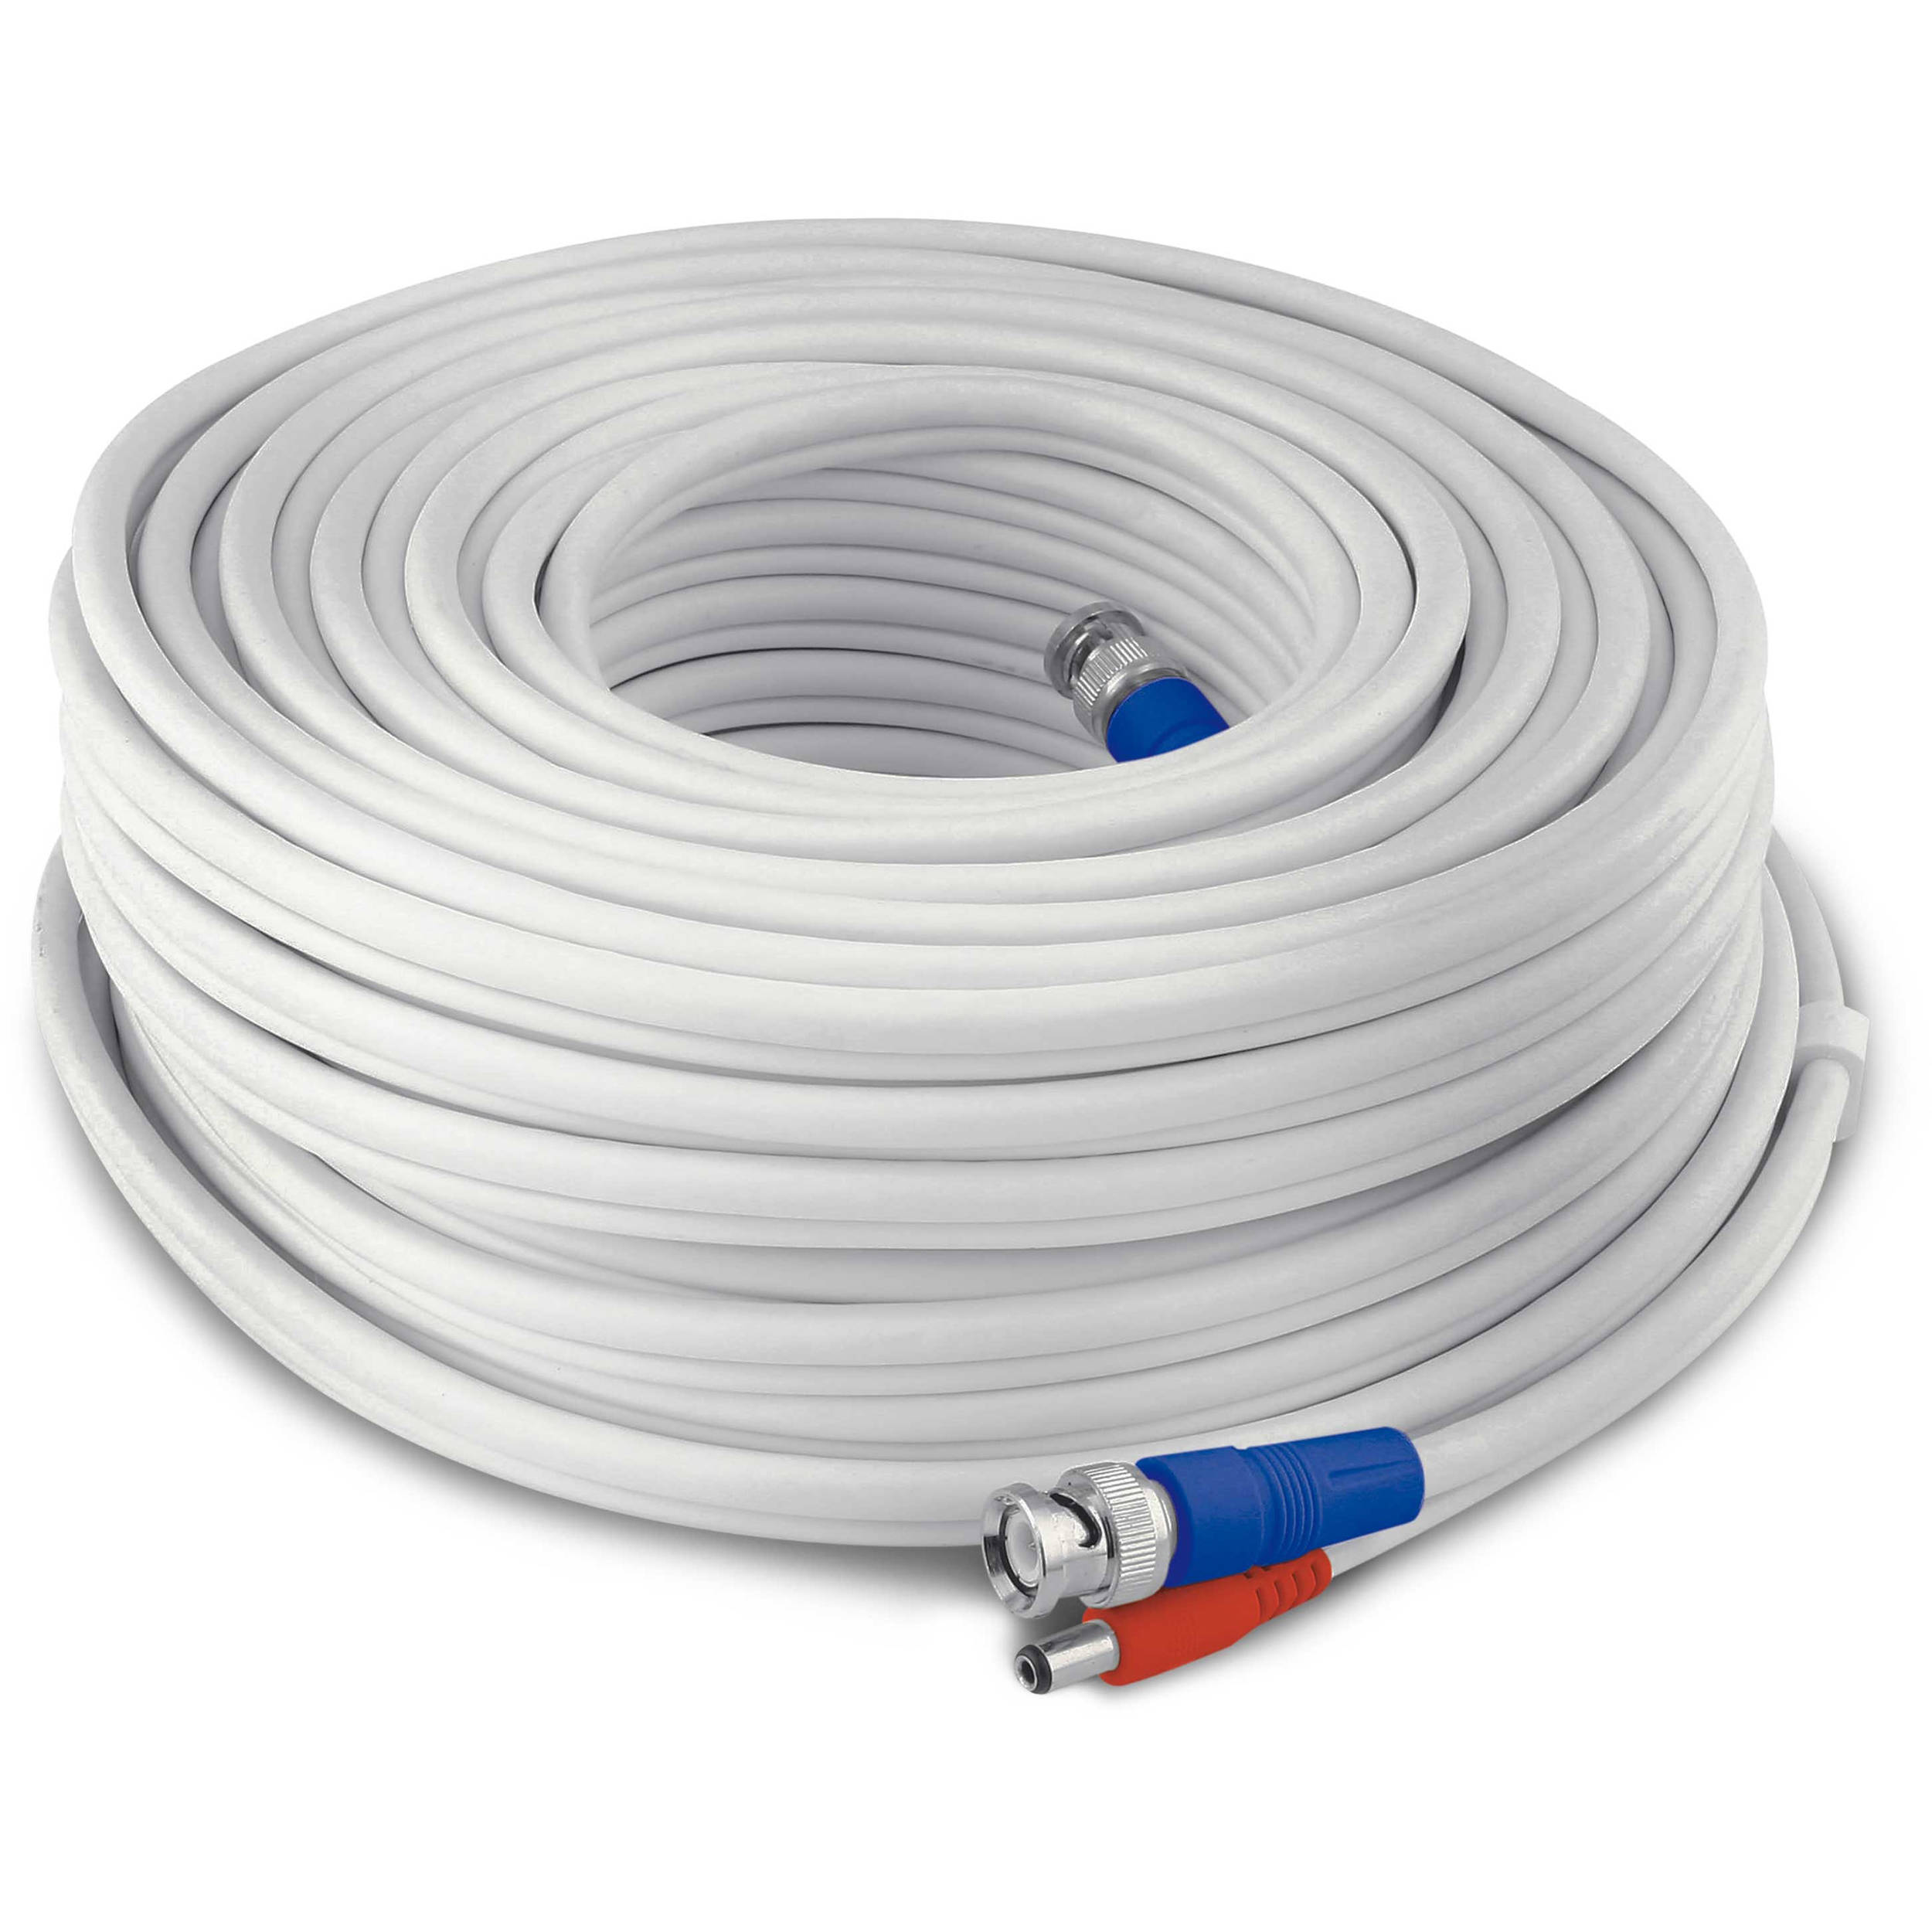 Swann Pro-Series HD Video and Power Cable (50') SWPRO-15MTVF-GL